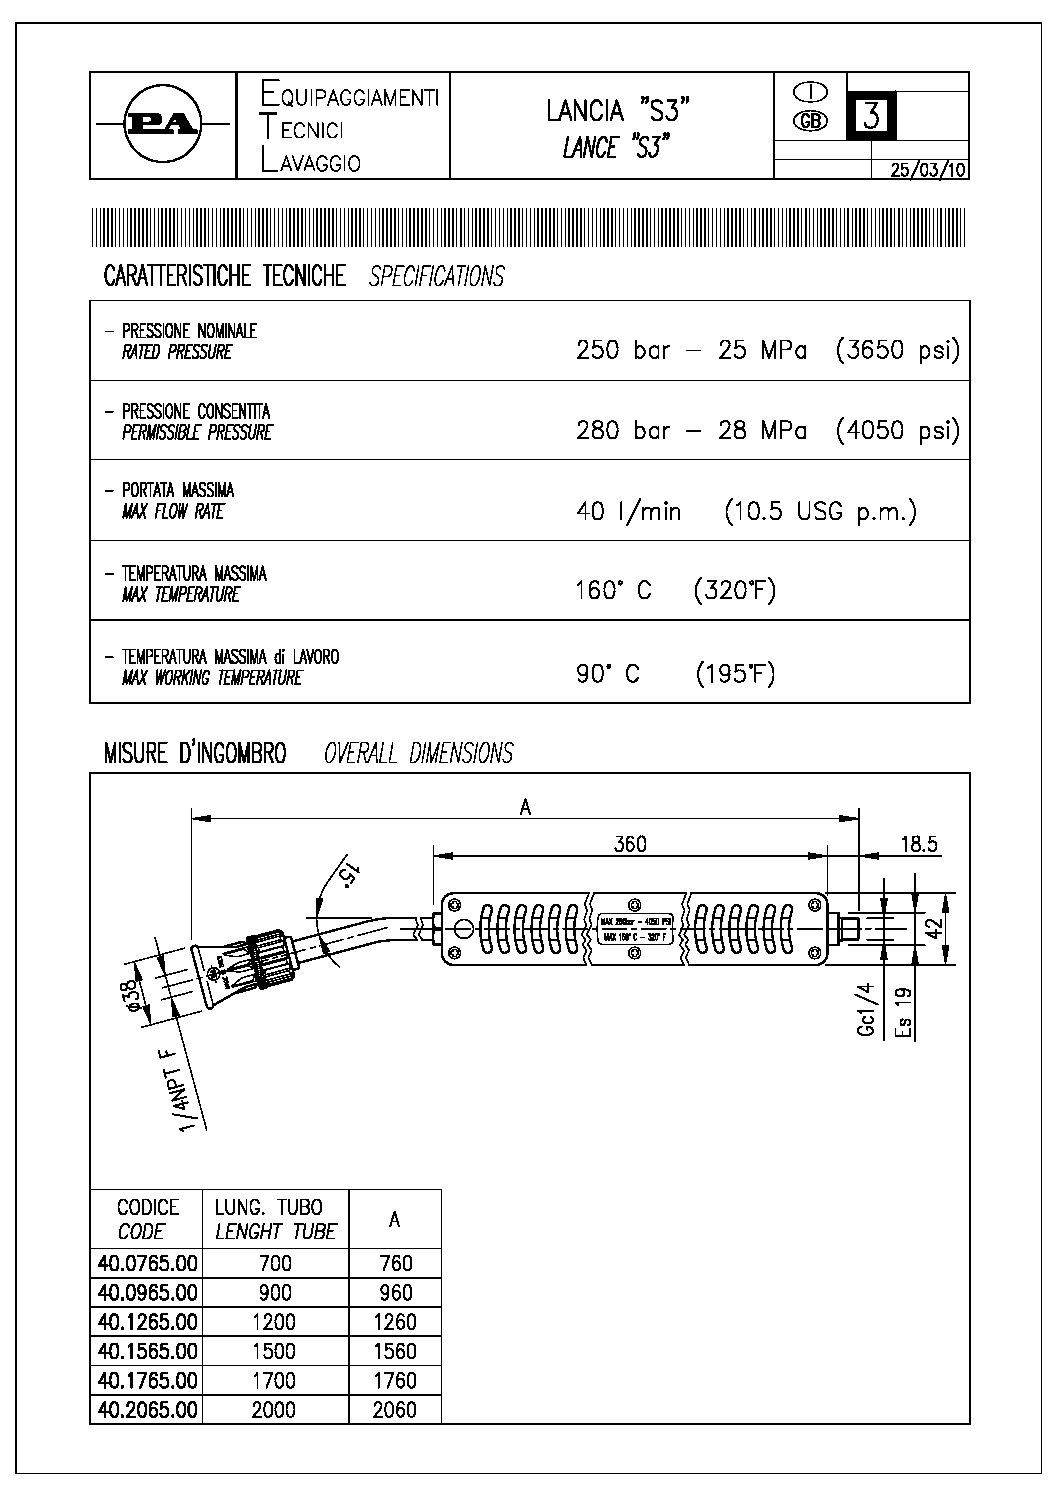 PA 5100 PSI Stainless Steel Lance technical information